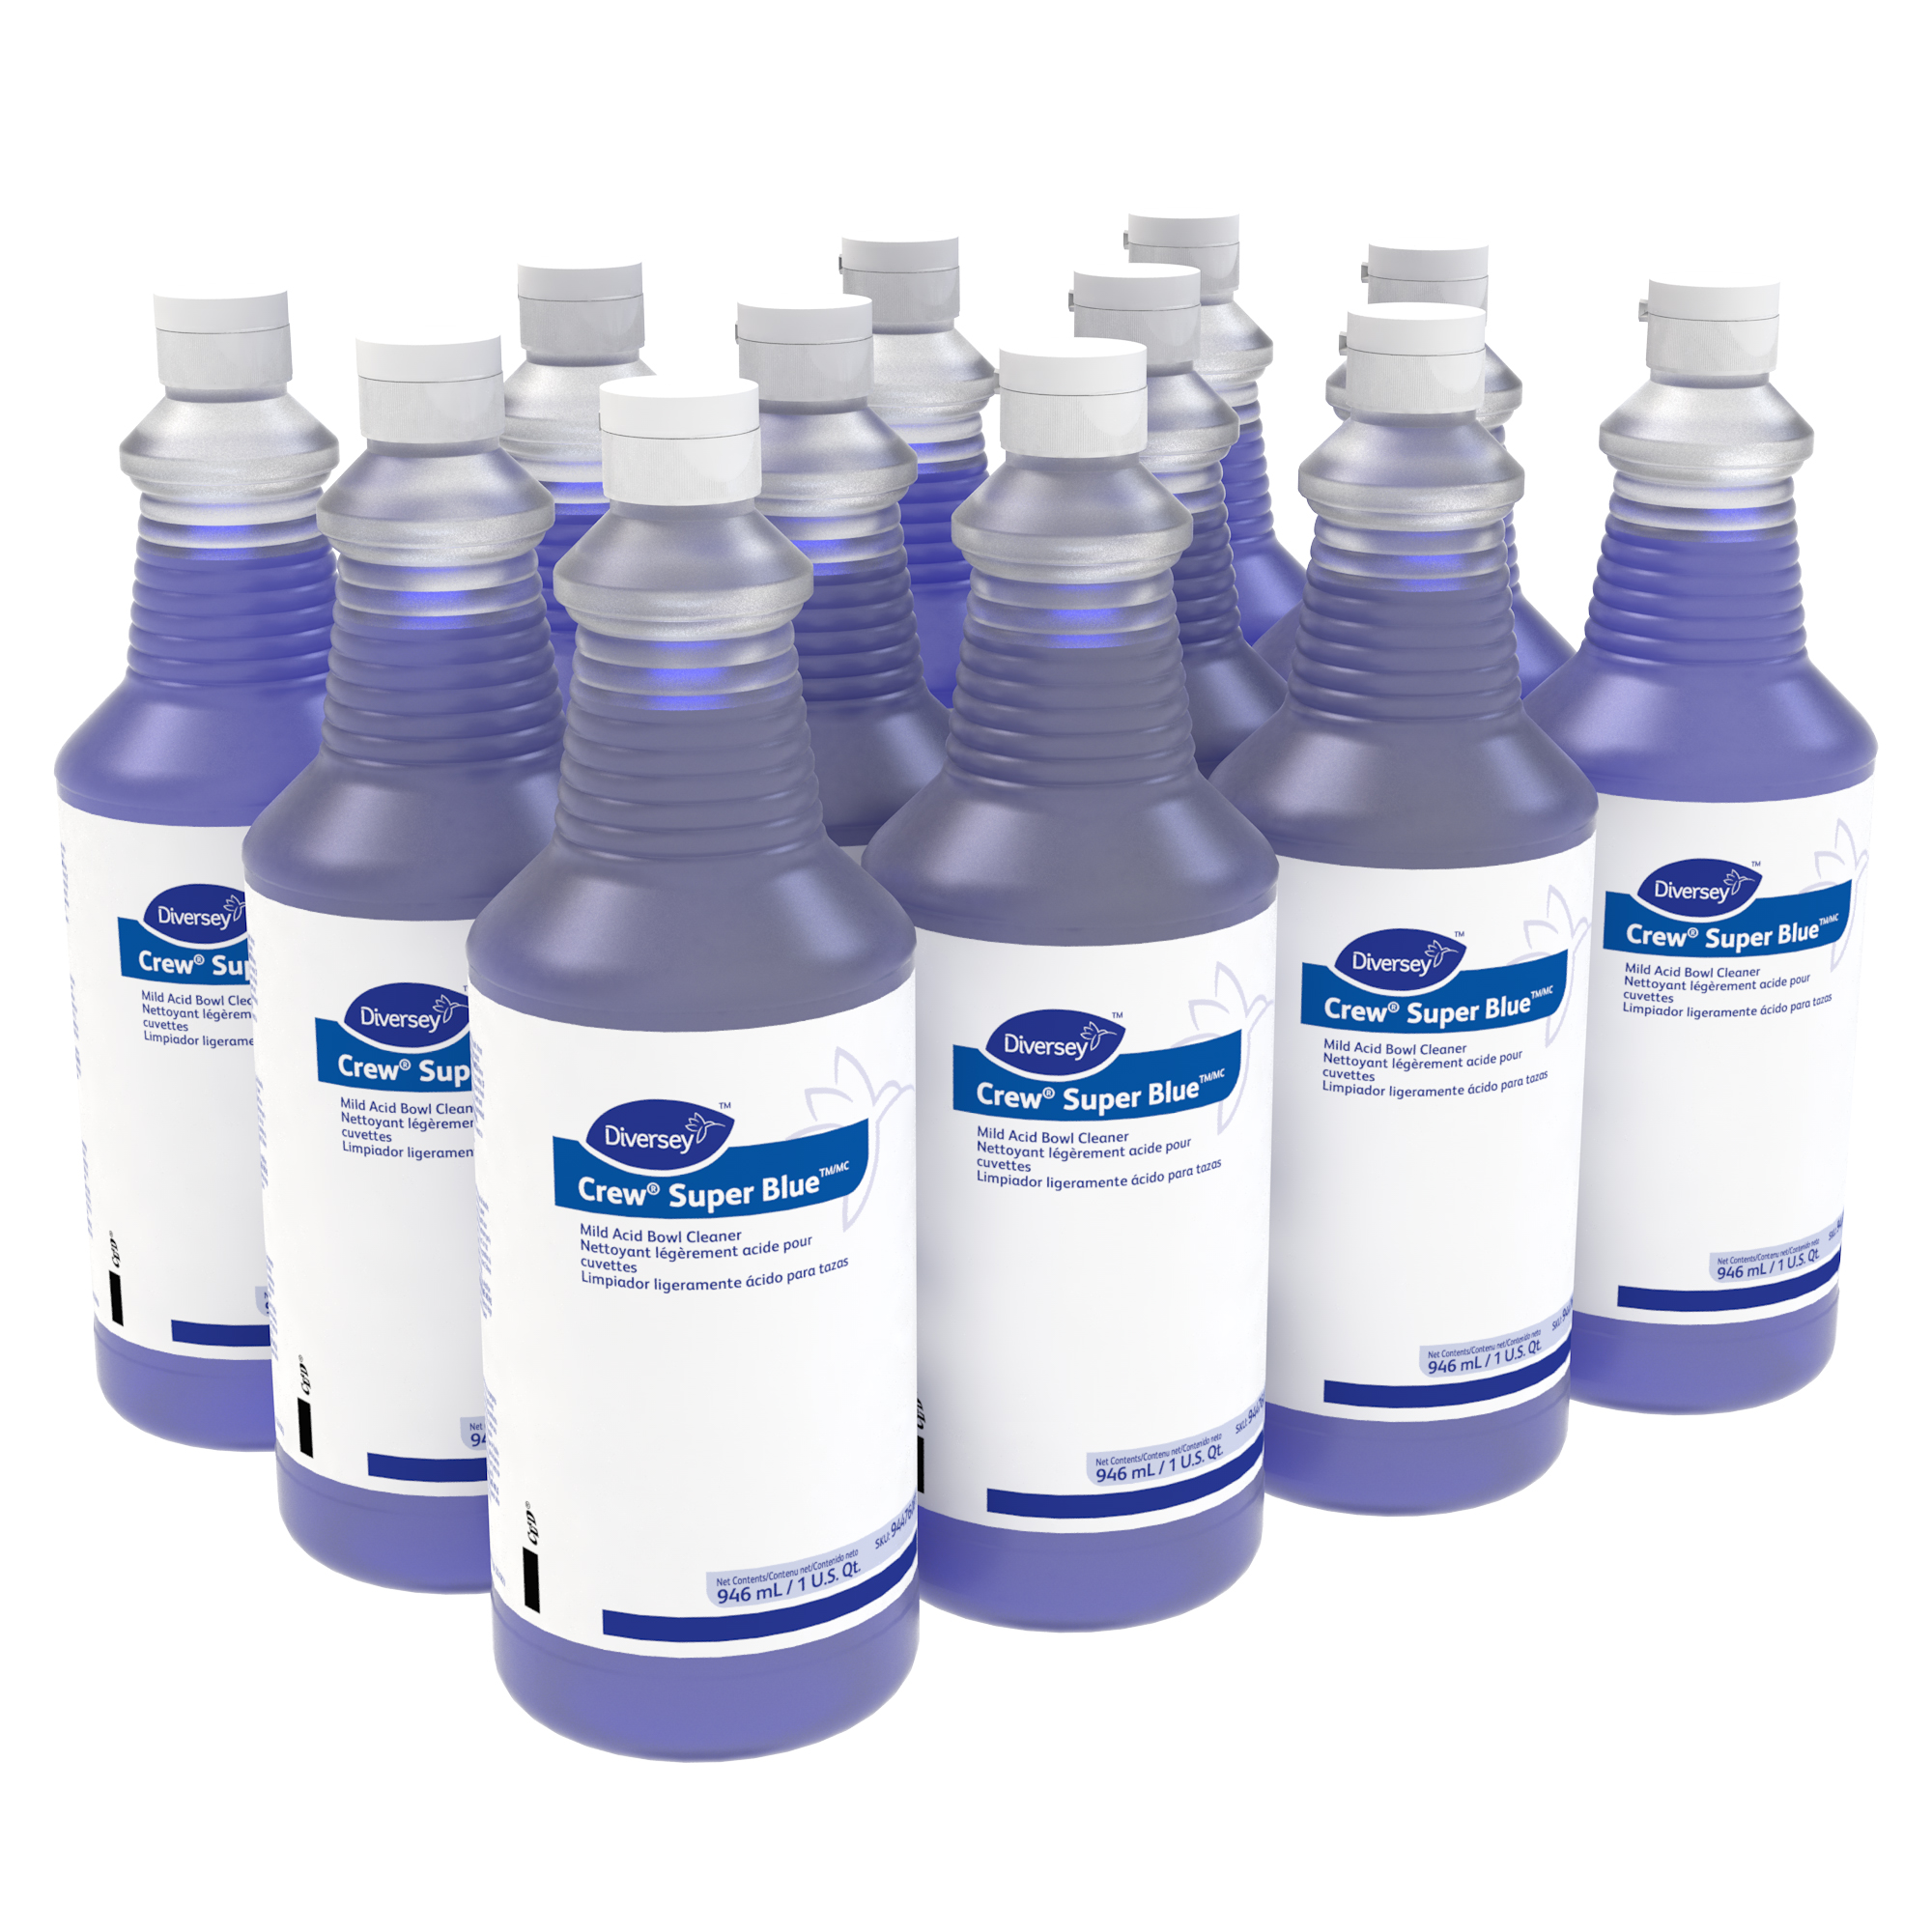 https://www.supplyden.com/images/products/large/94476081_Crew_Super_Blue_12x32oz_Multipack_2000x2000.jpg